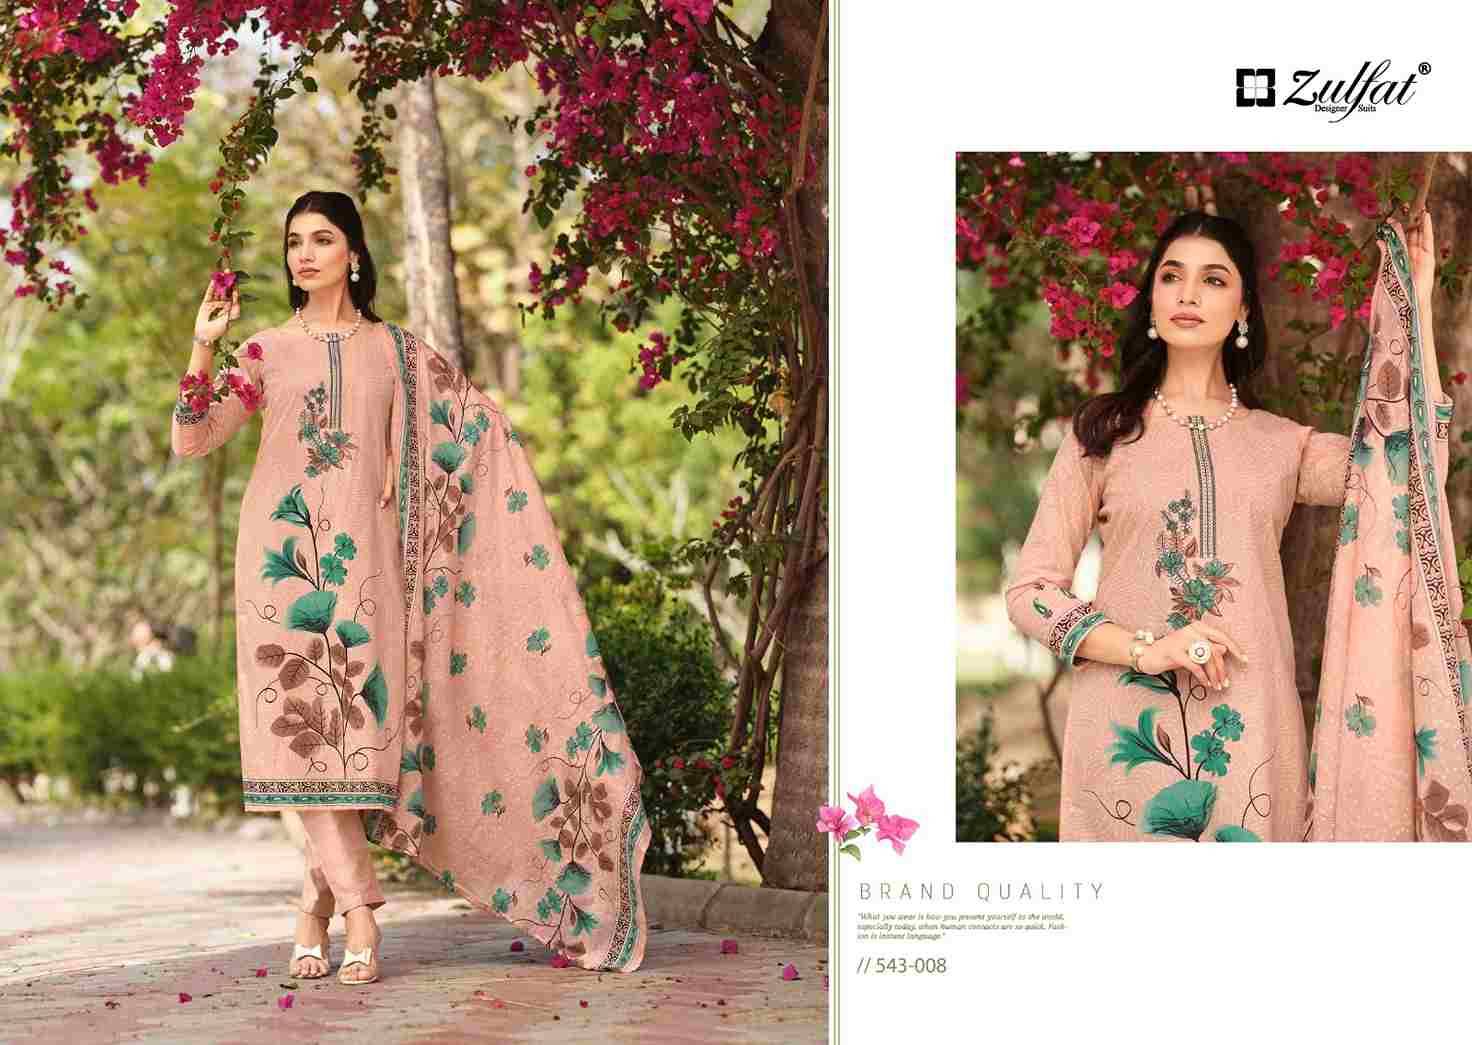 Florence By Zulfat 543-001 To 543-008 Series Beautiful Festive Suits Stylish Fancy Colorful Casual Wear & Ethnic Wear Pure Cotton Print Dresses At Wholesale Price